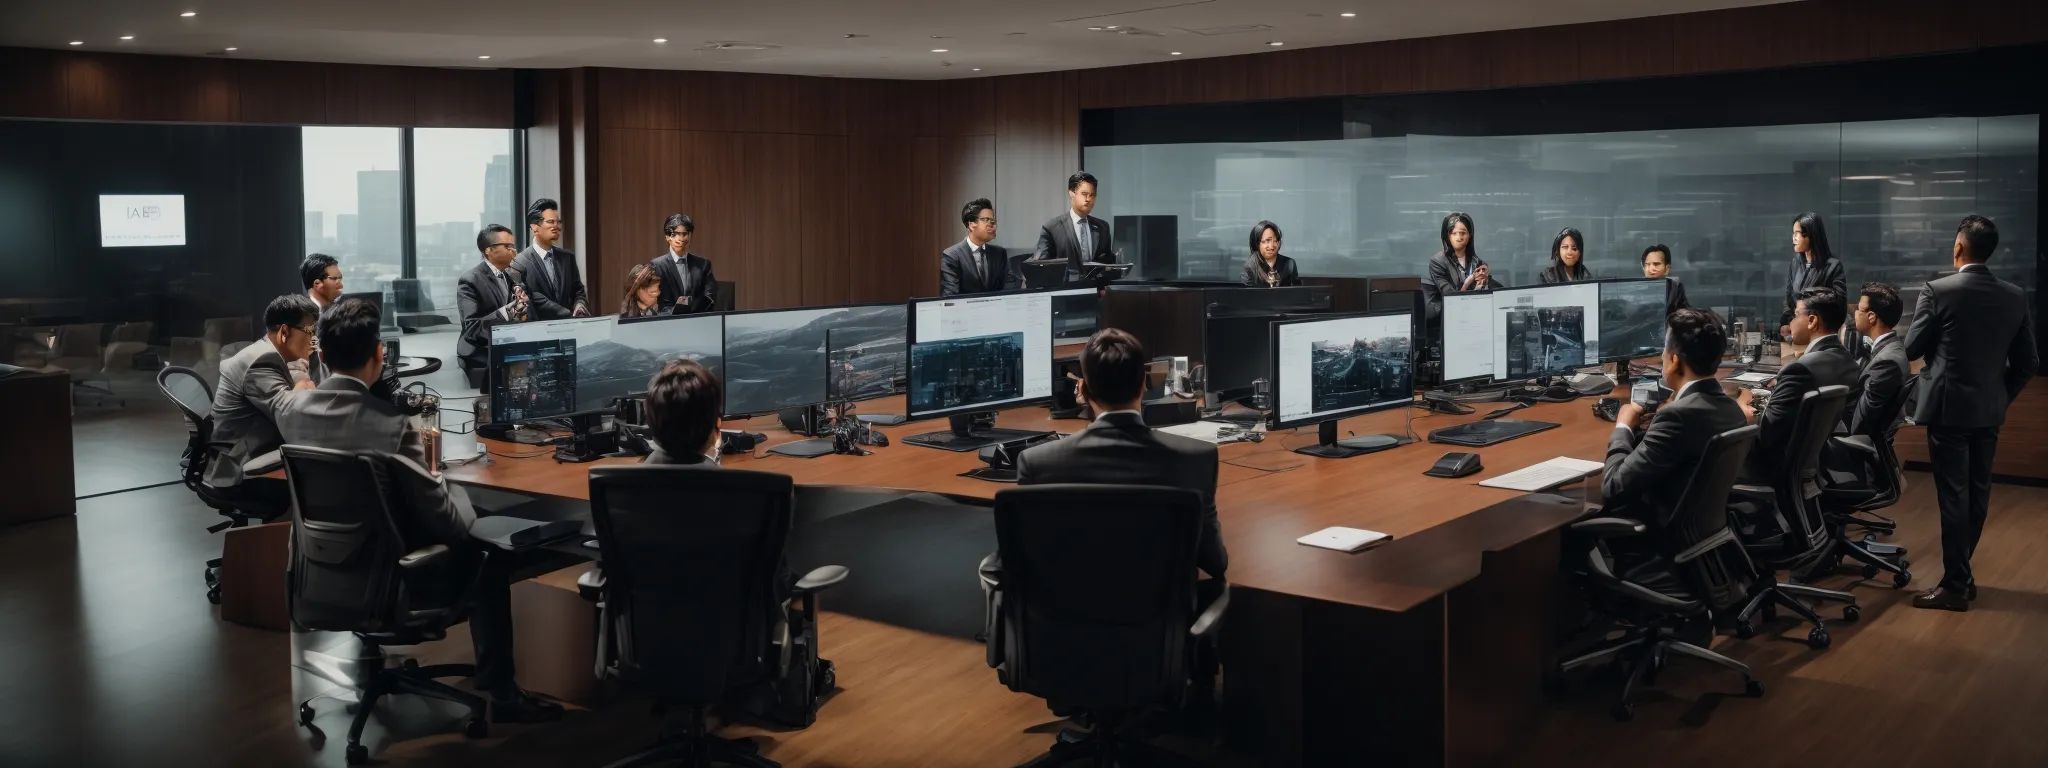 a team of professionals congregates around a sleek conference table, each equipped with cutting-edge technology, immersed in strategizing a company's digital marketing future.